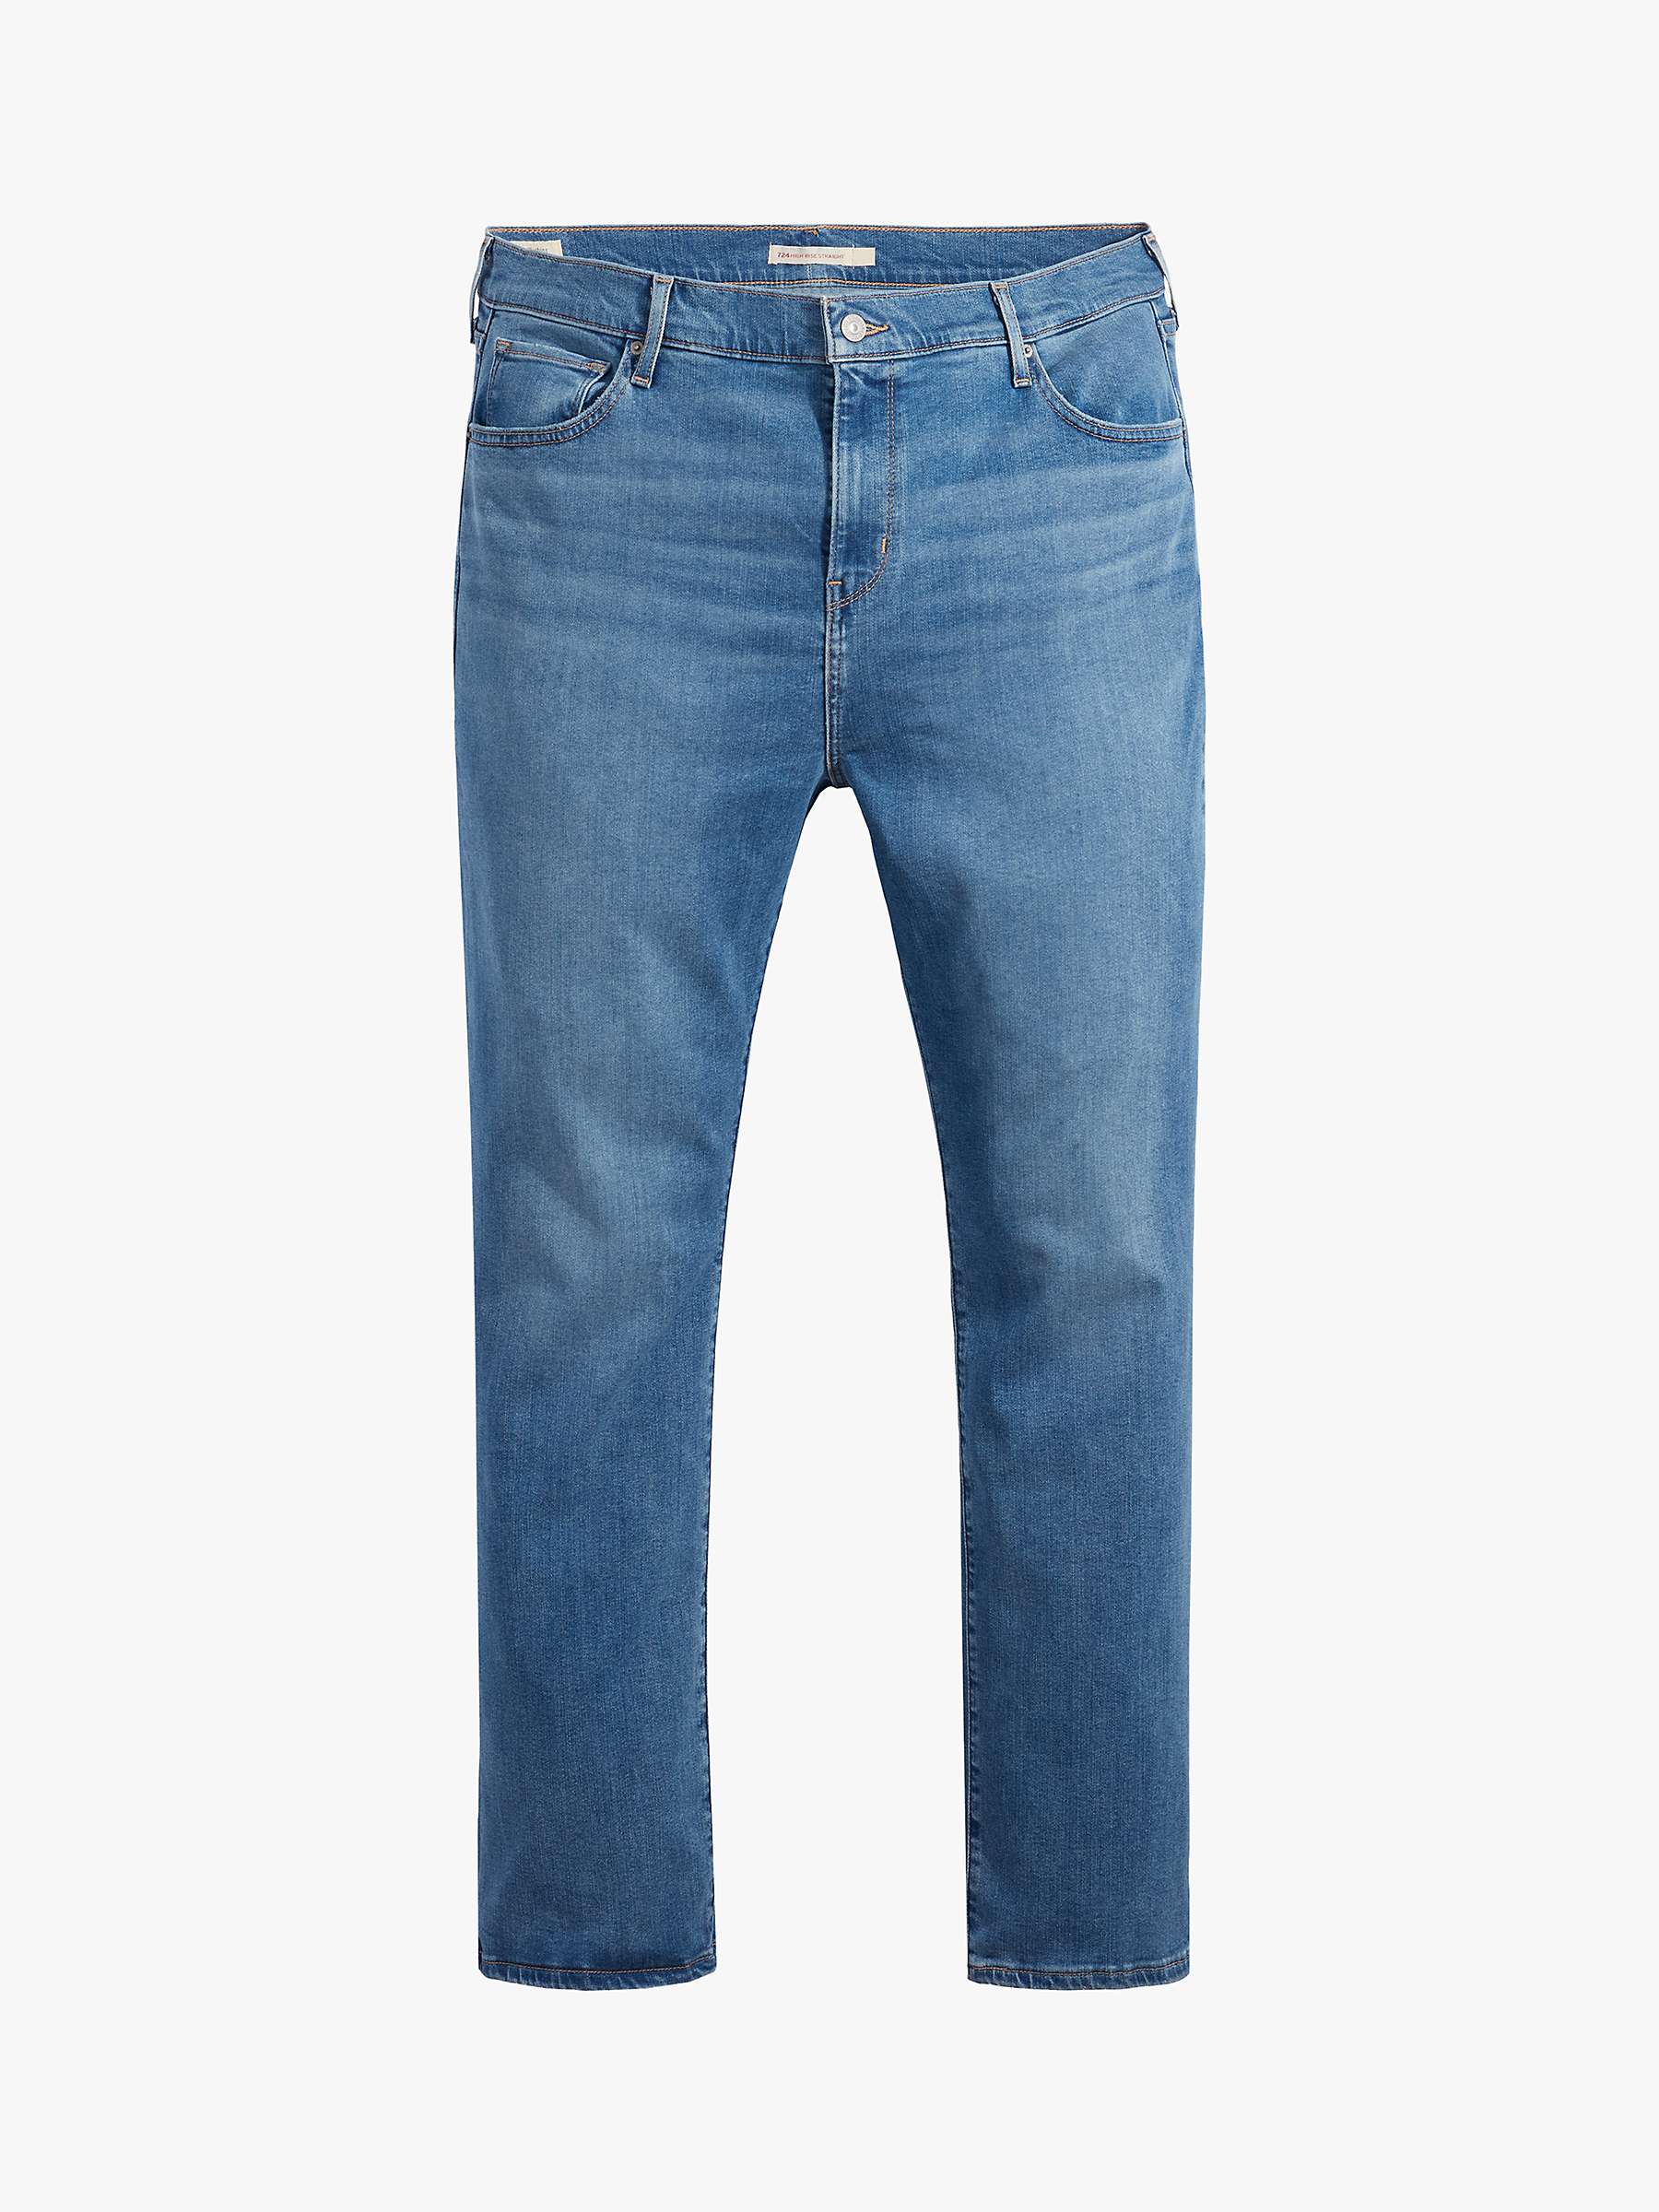 Buy Levi's Plus 724 High Rise Straight Jeans, Rio Frost Plus Online at johnlewis.com